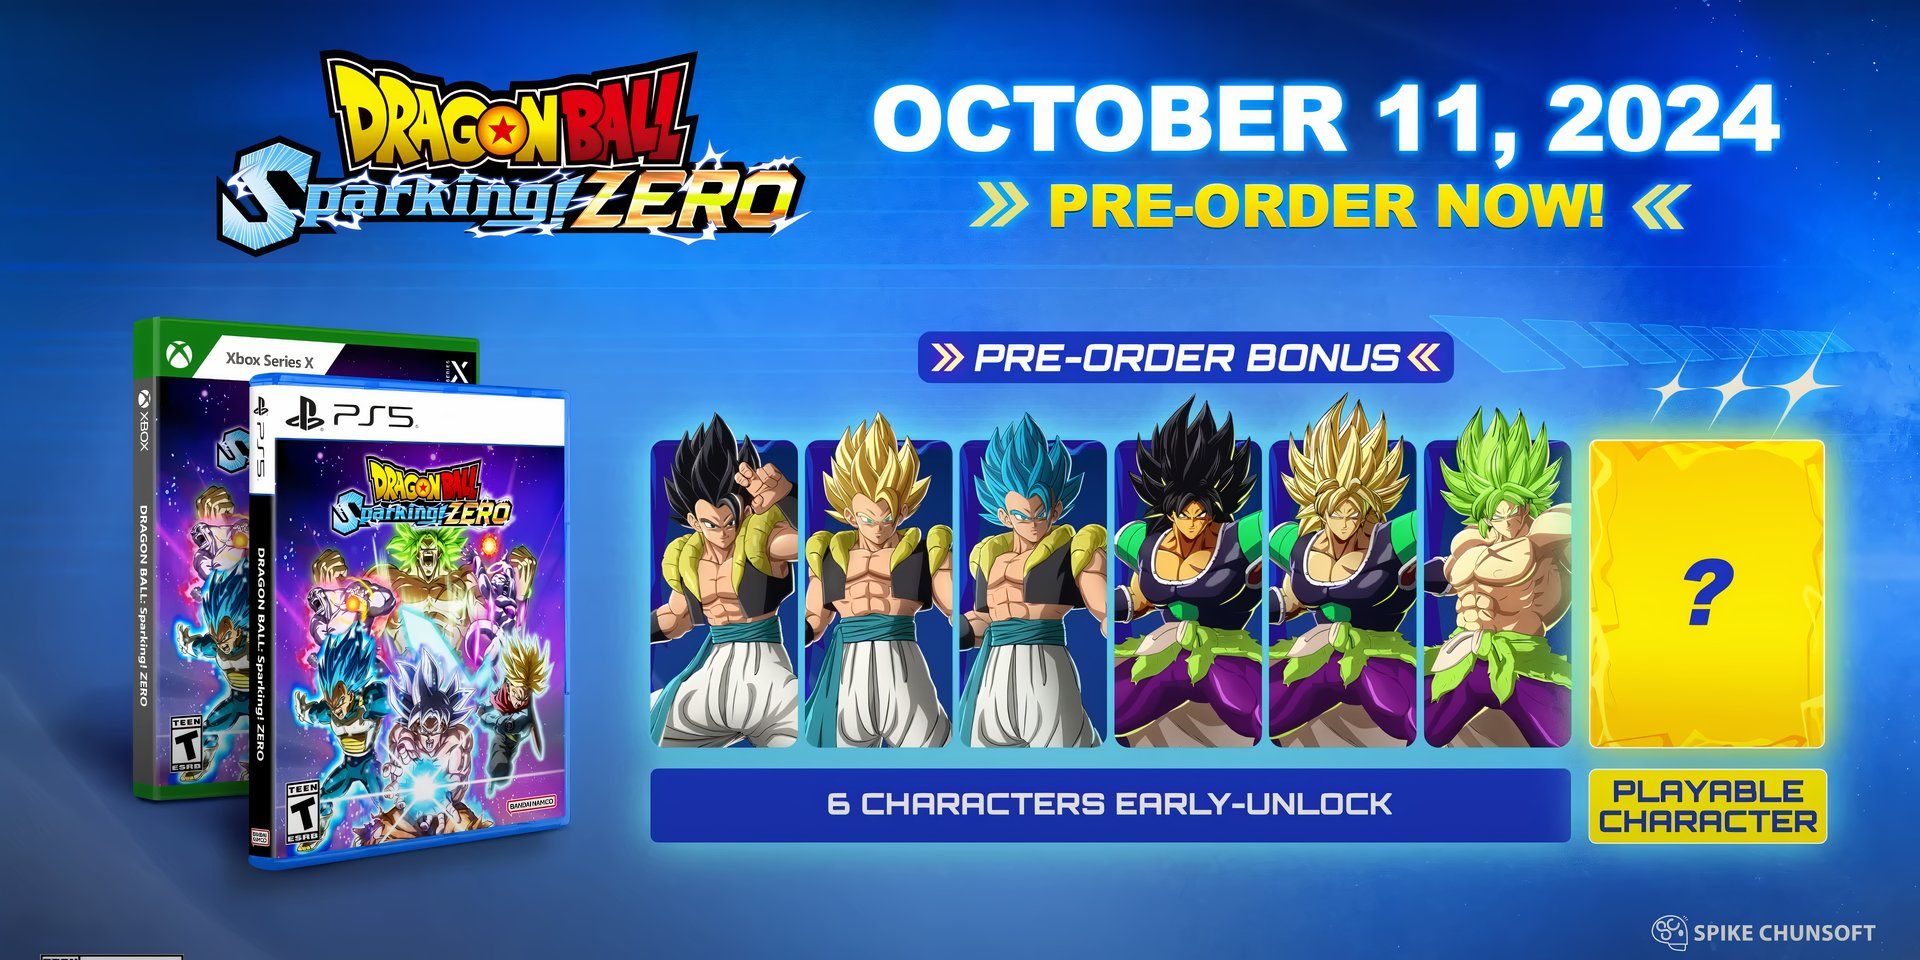 A screenshot of the Sparking Zero trailer showing the Pre-Order Bonus early character unlocks